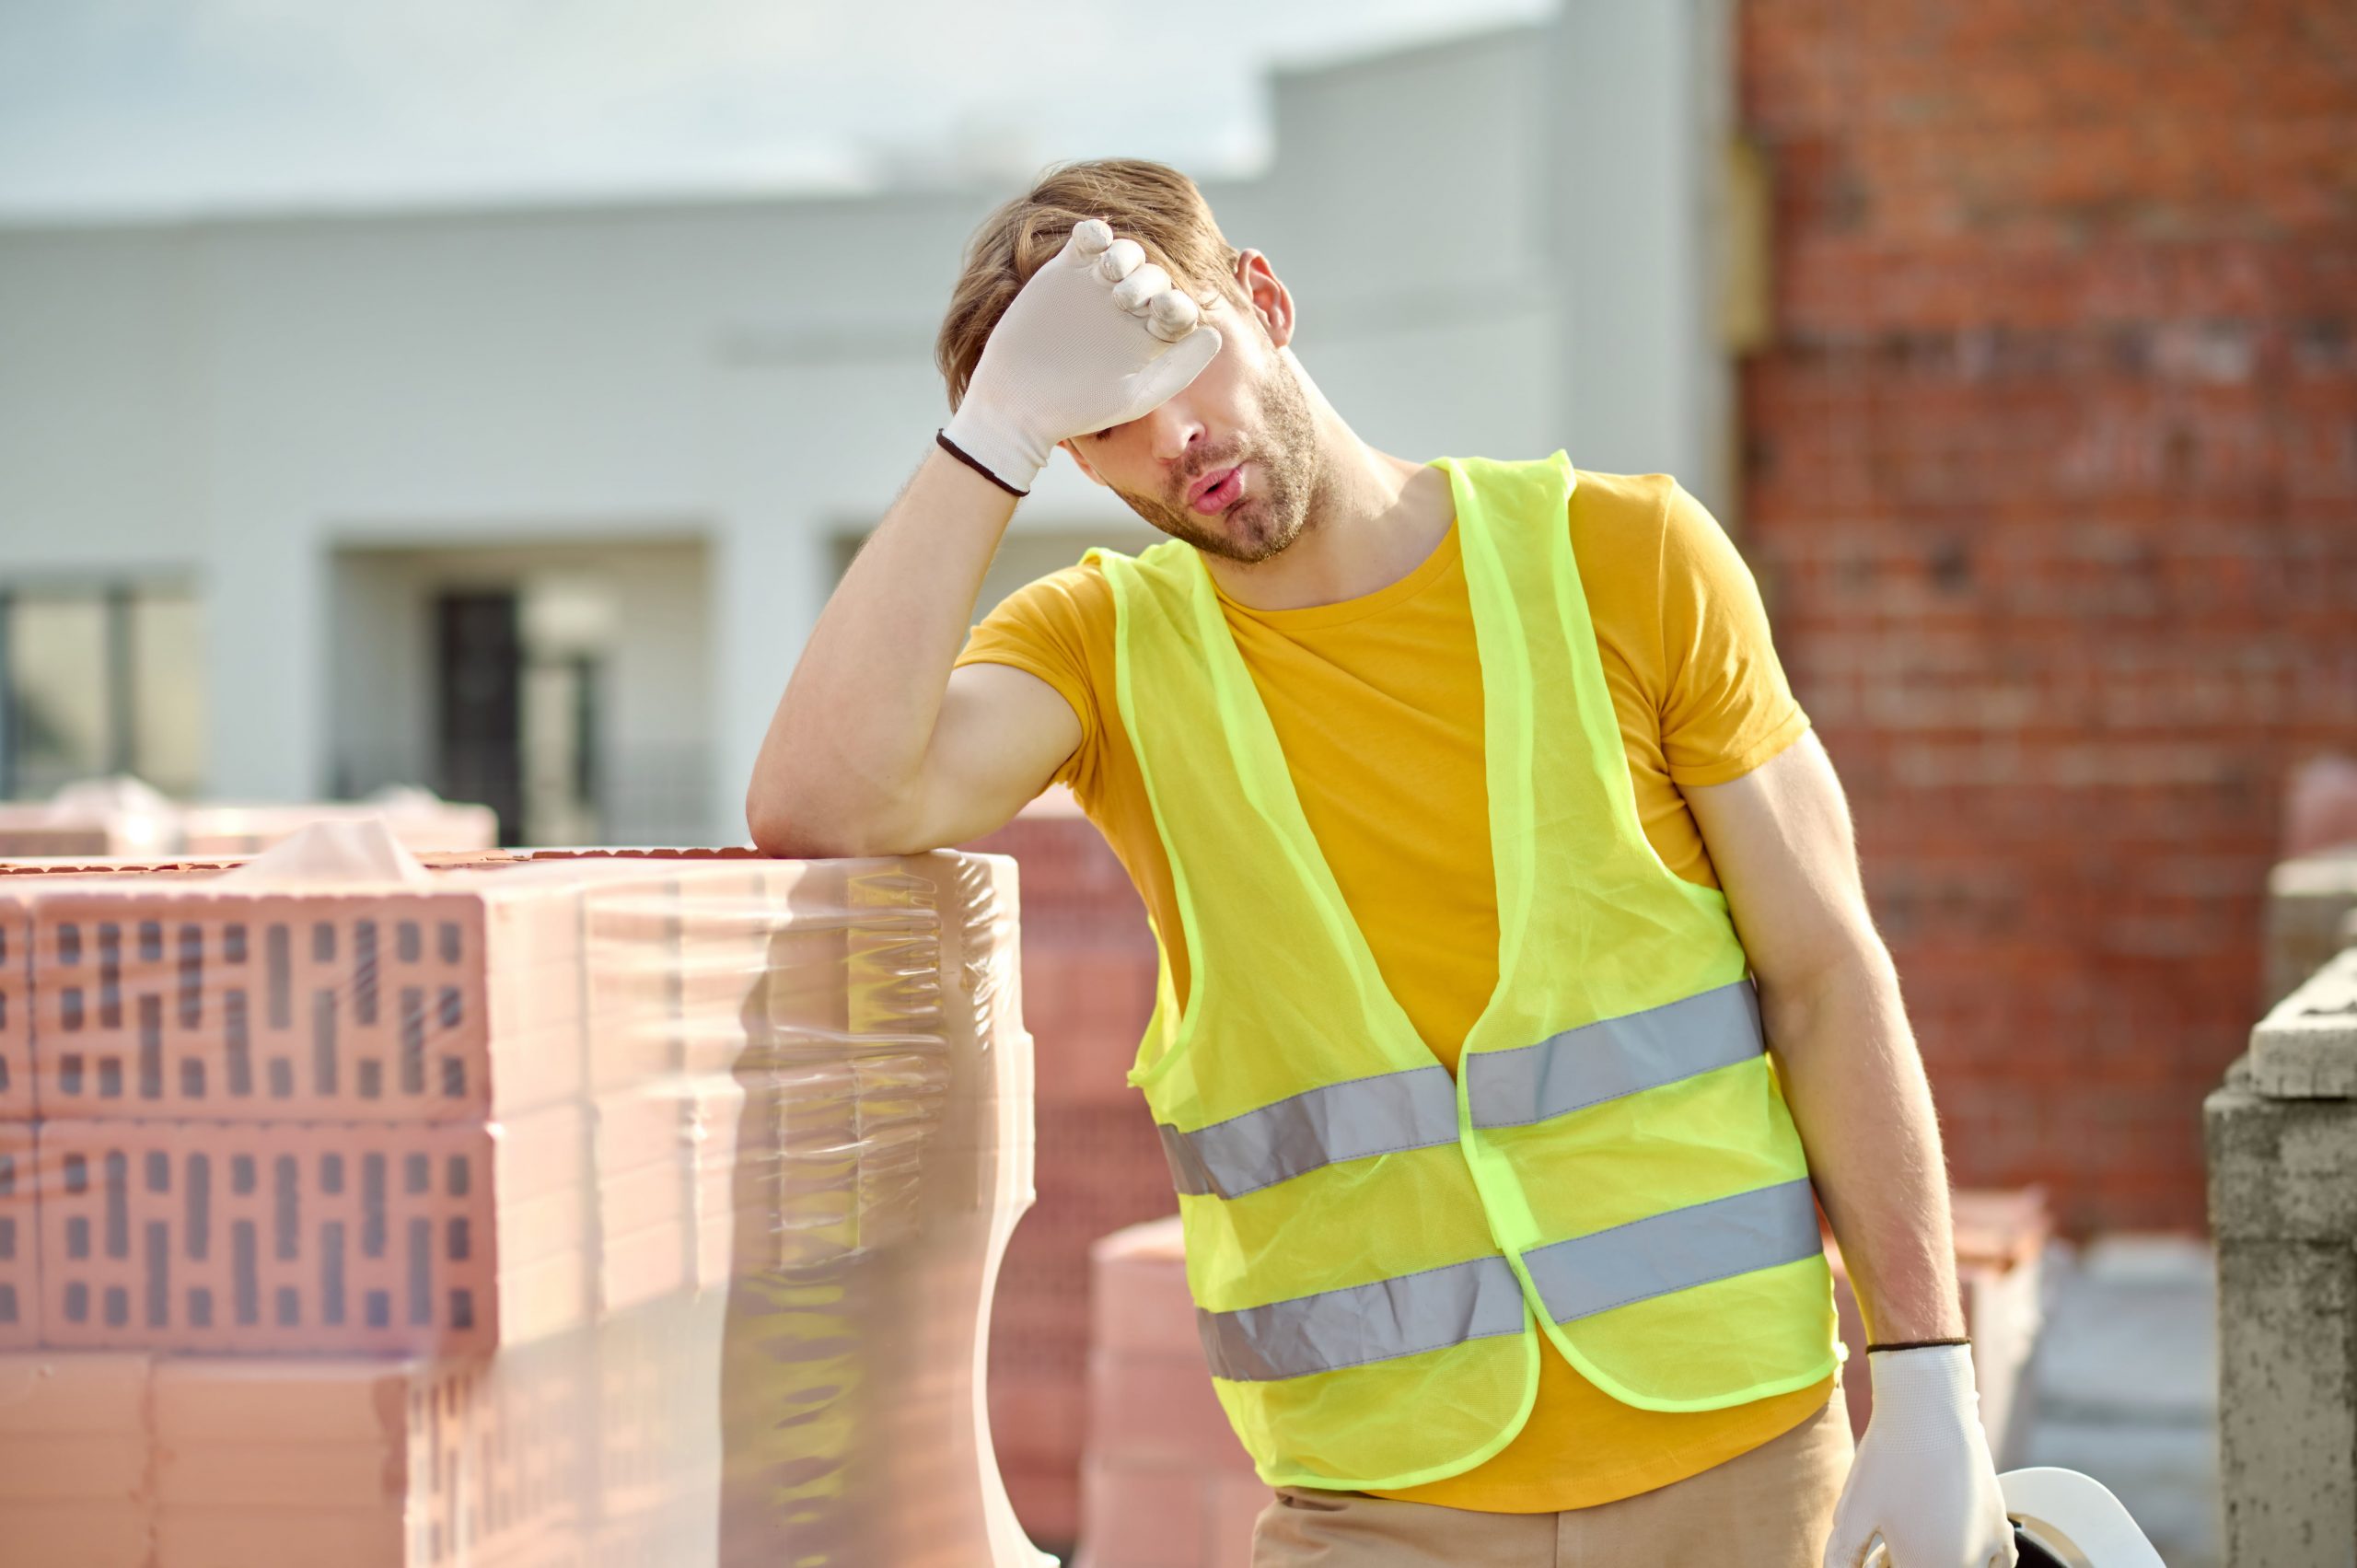 Brooklyn workers compensation attorney